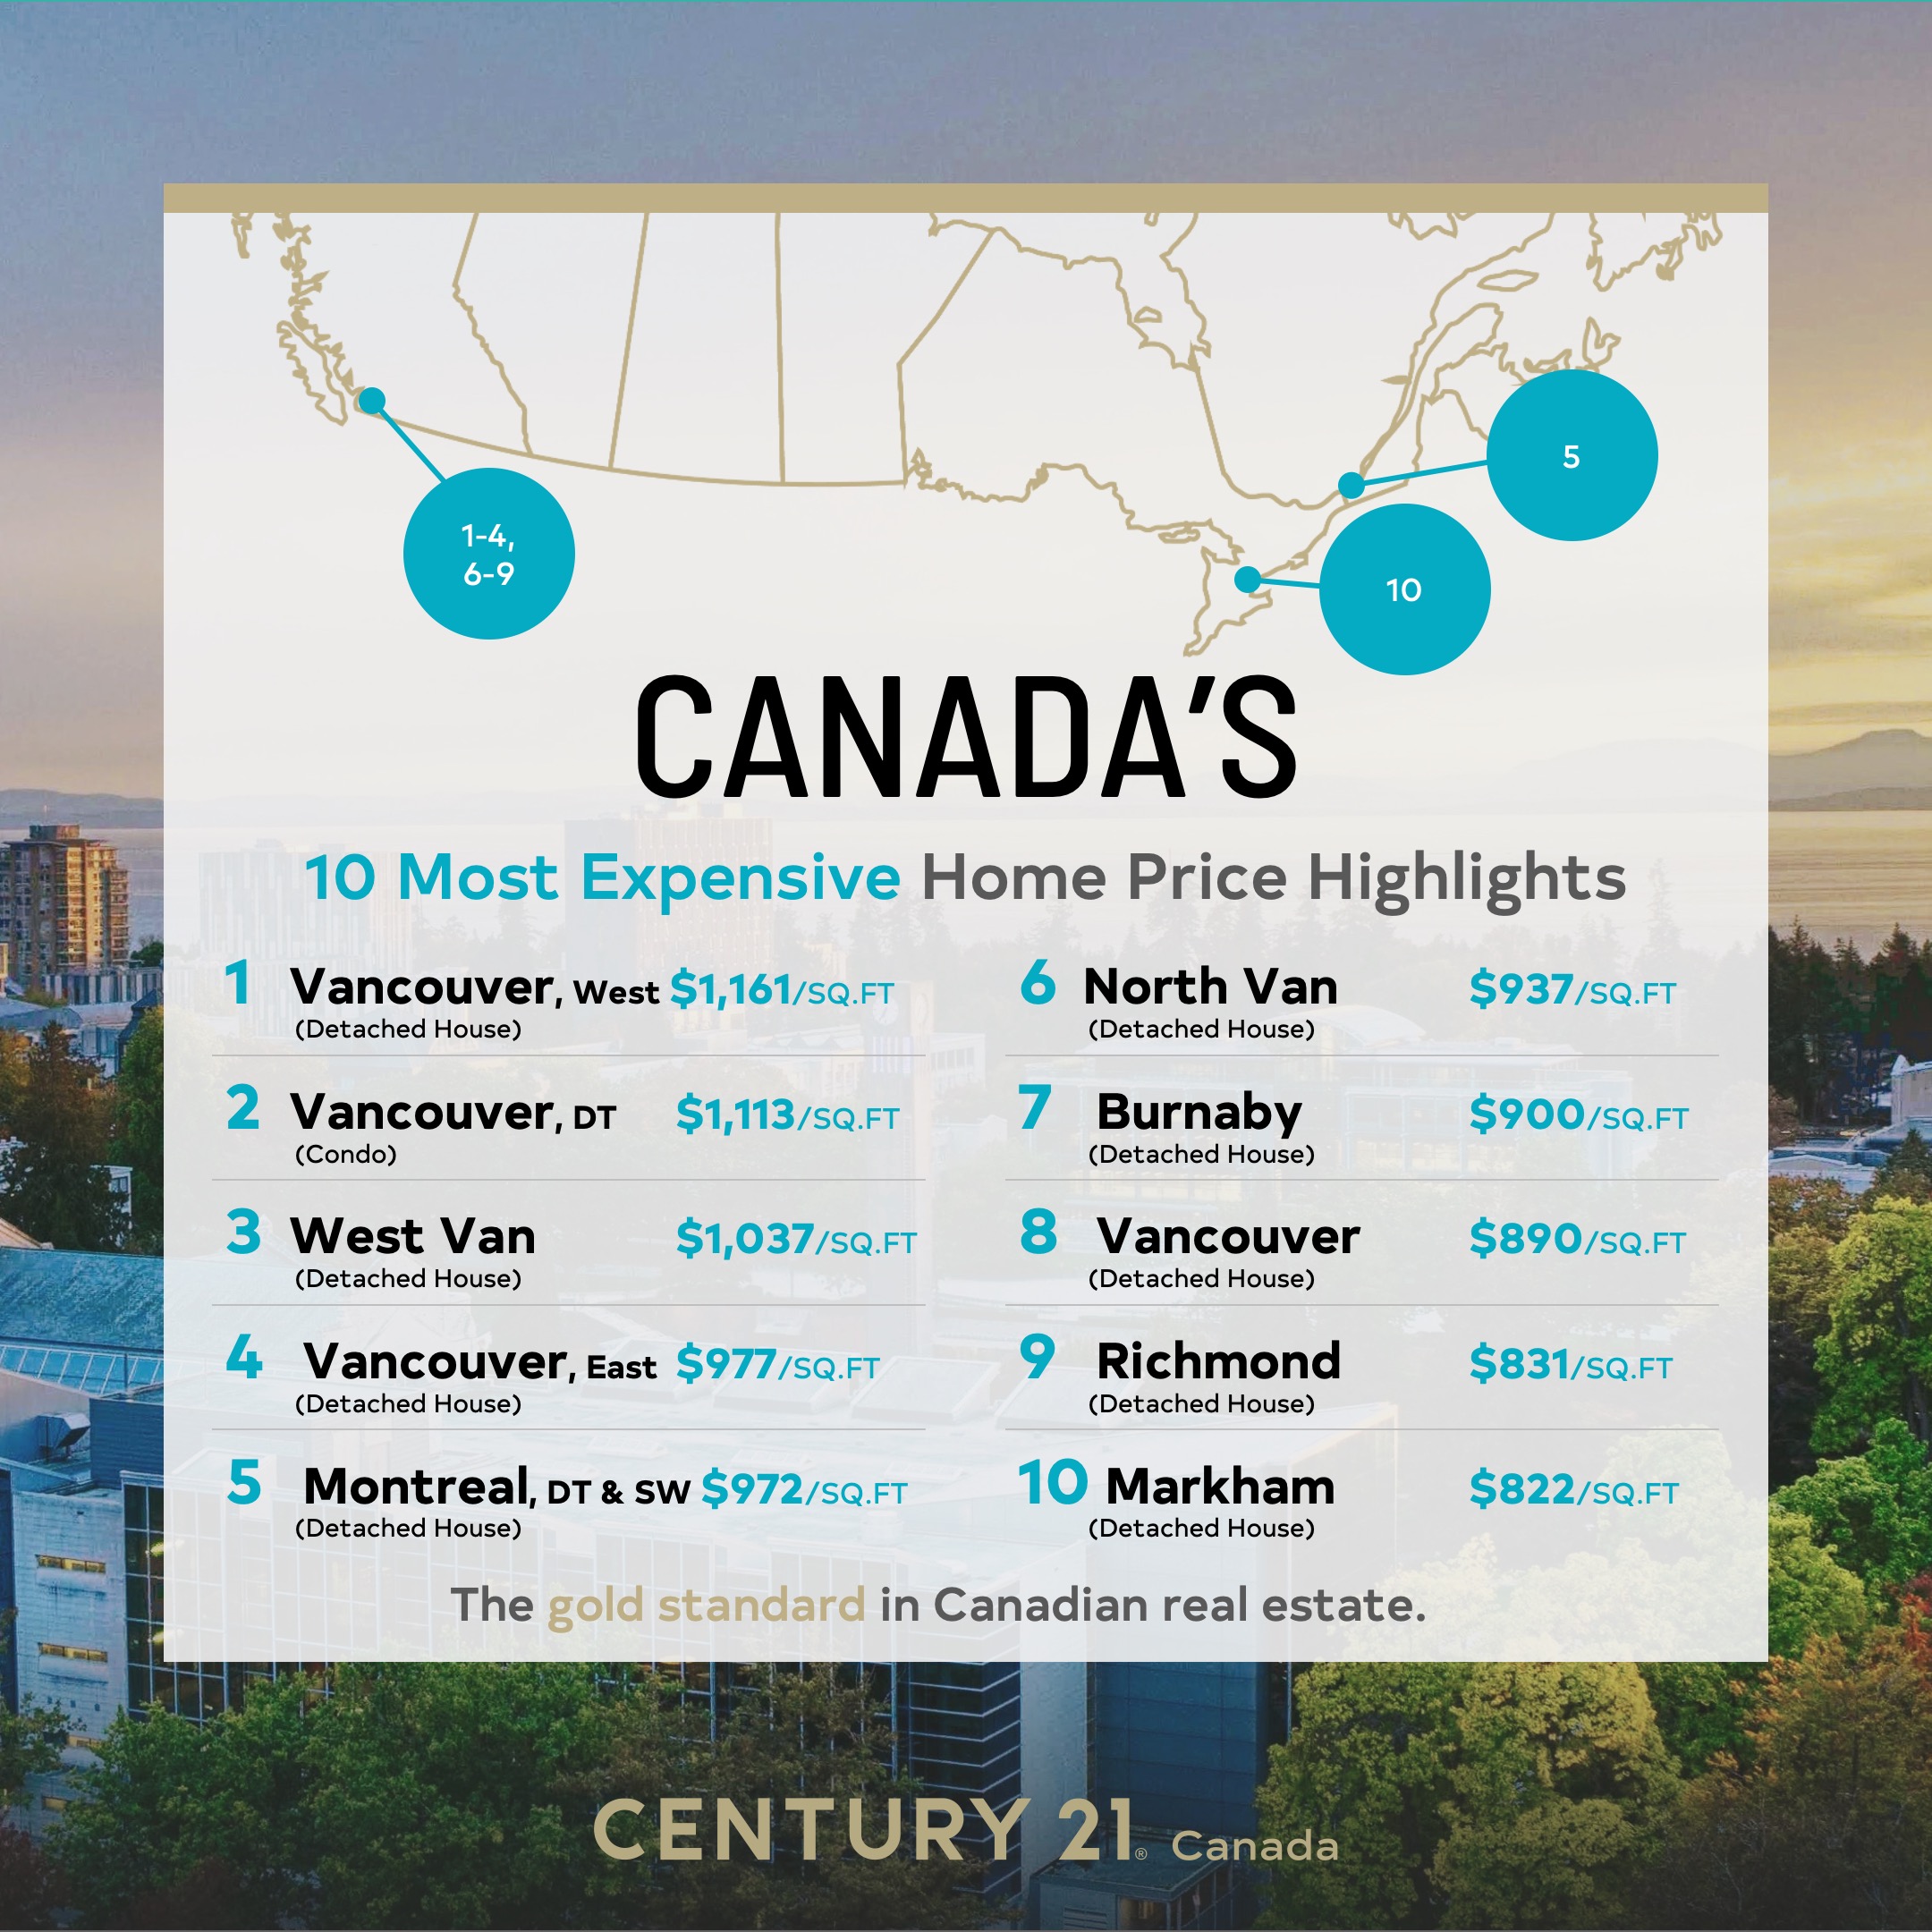 Canada's 10 Most Expensive Home Price Highlights